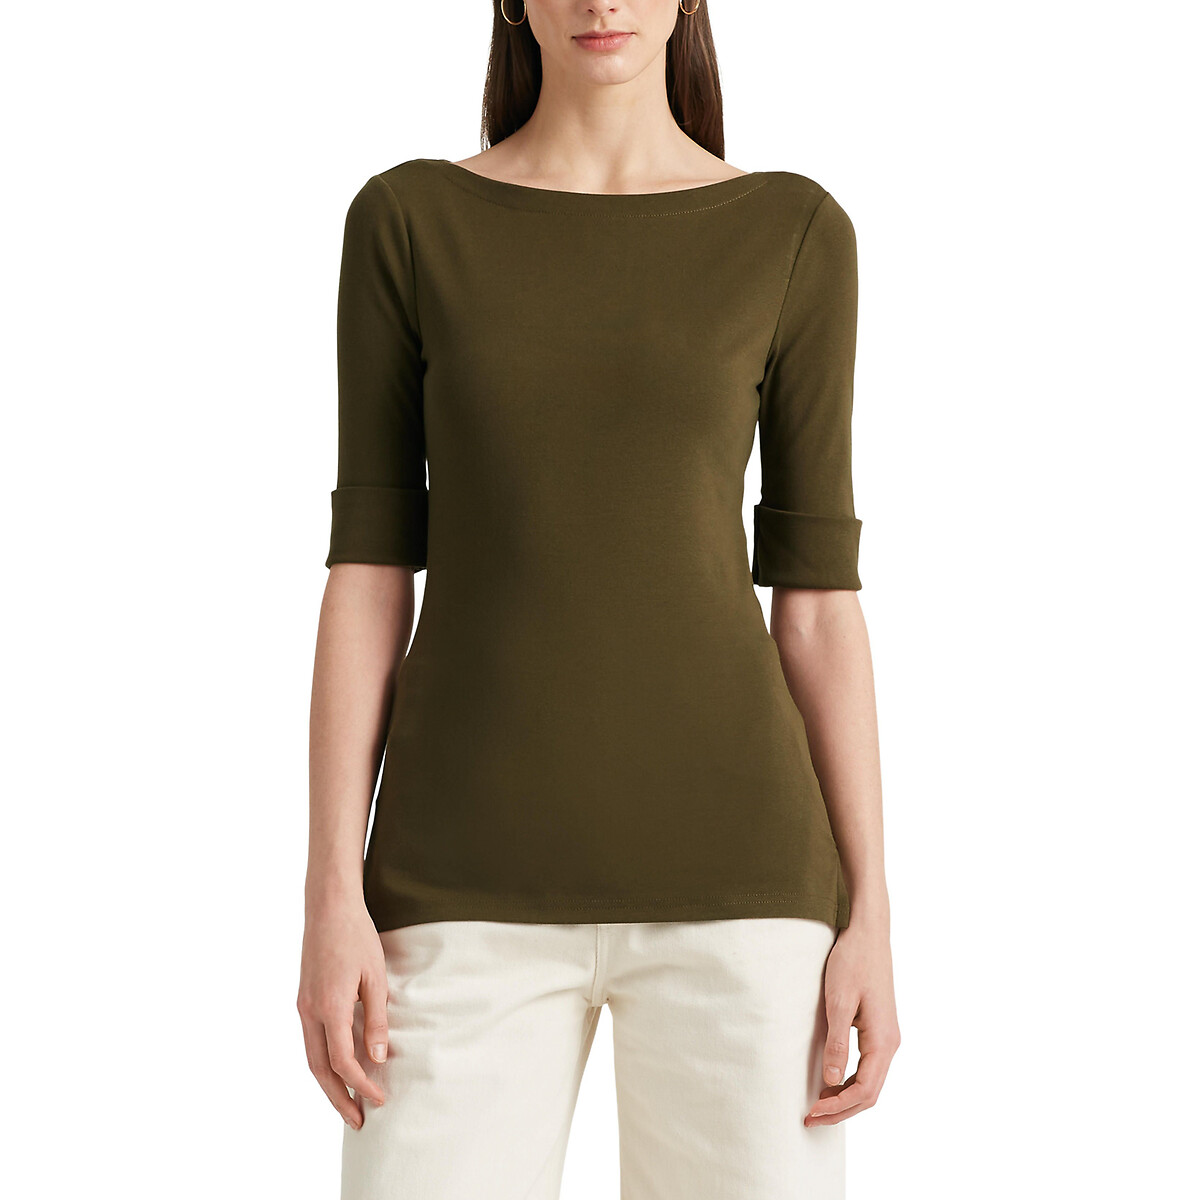 Image of Stretch Cotton T-Shirt with Boat Neck and Elbow-Length Sleeves